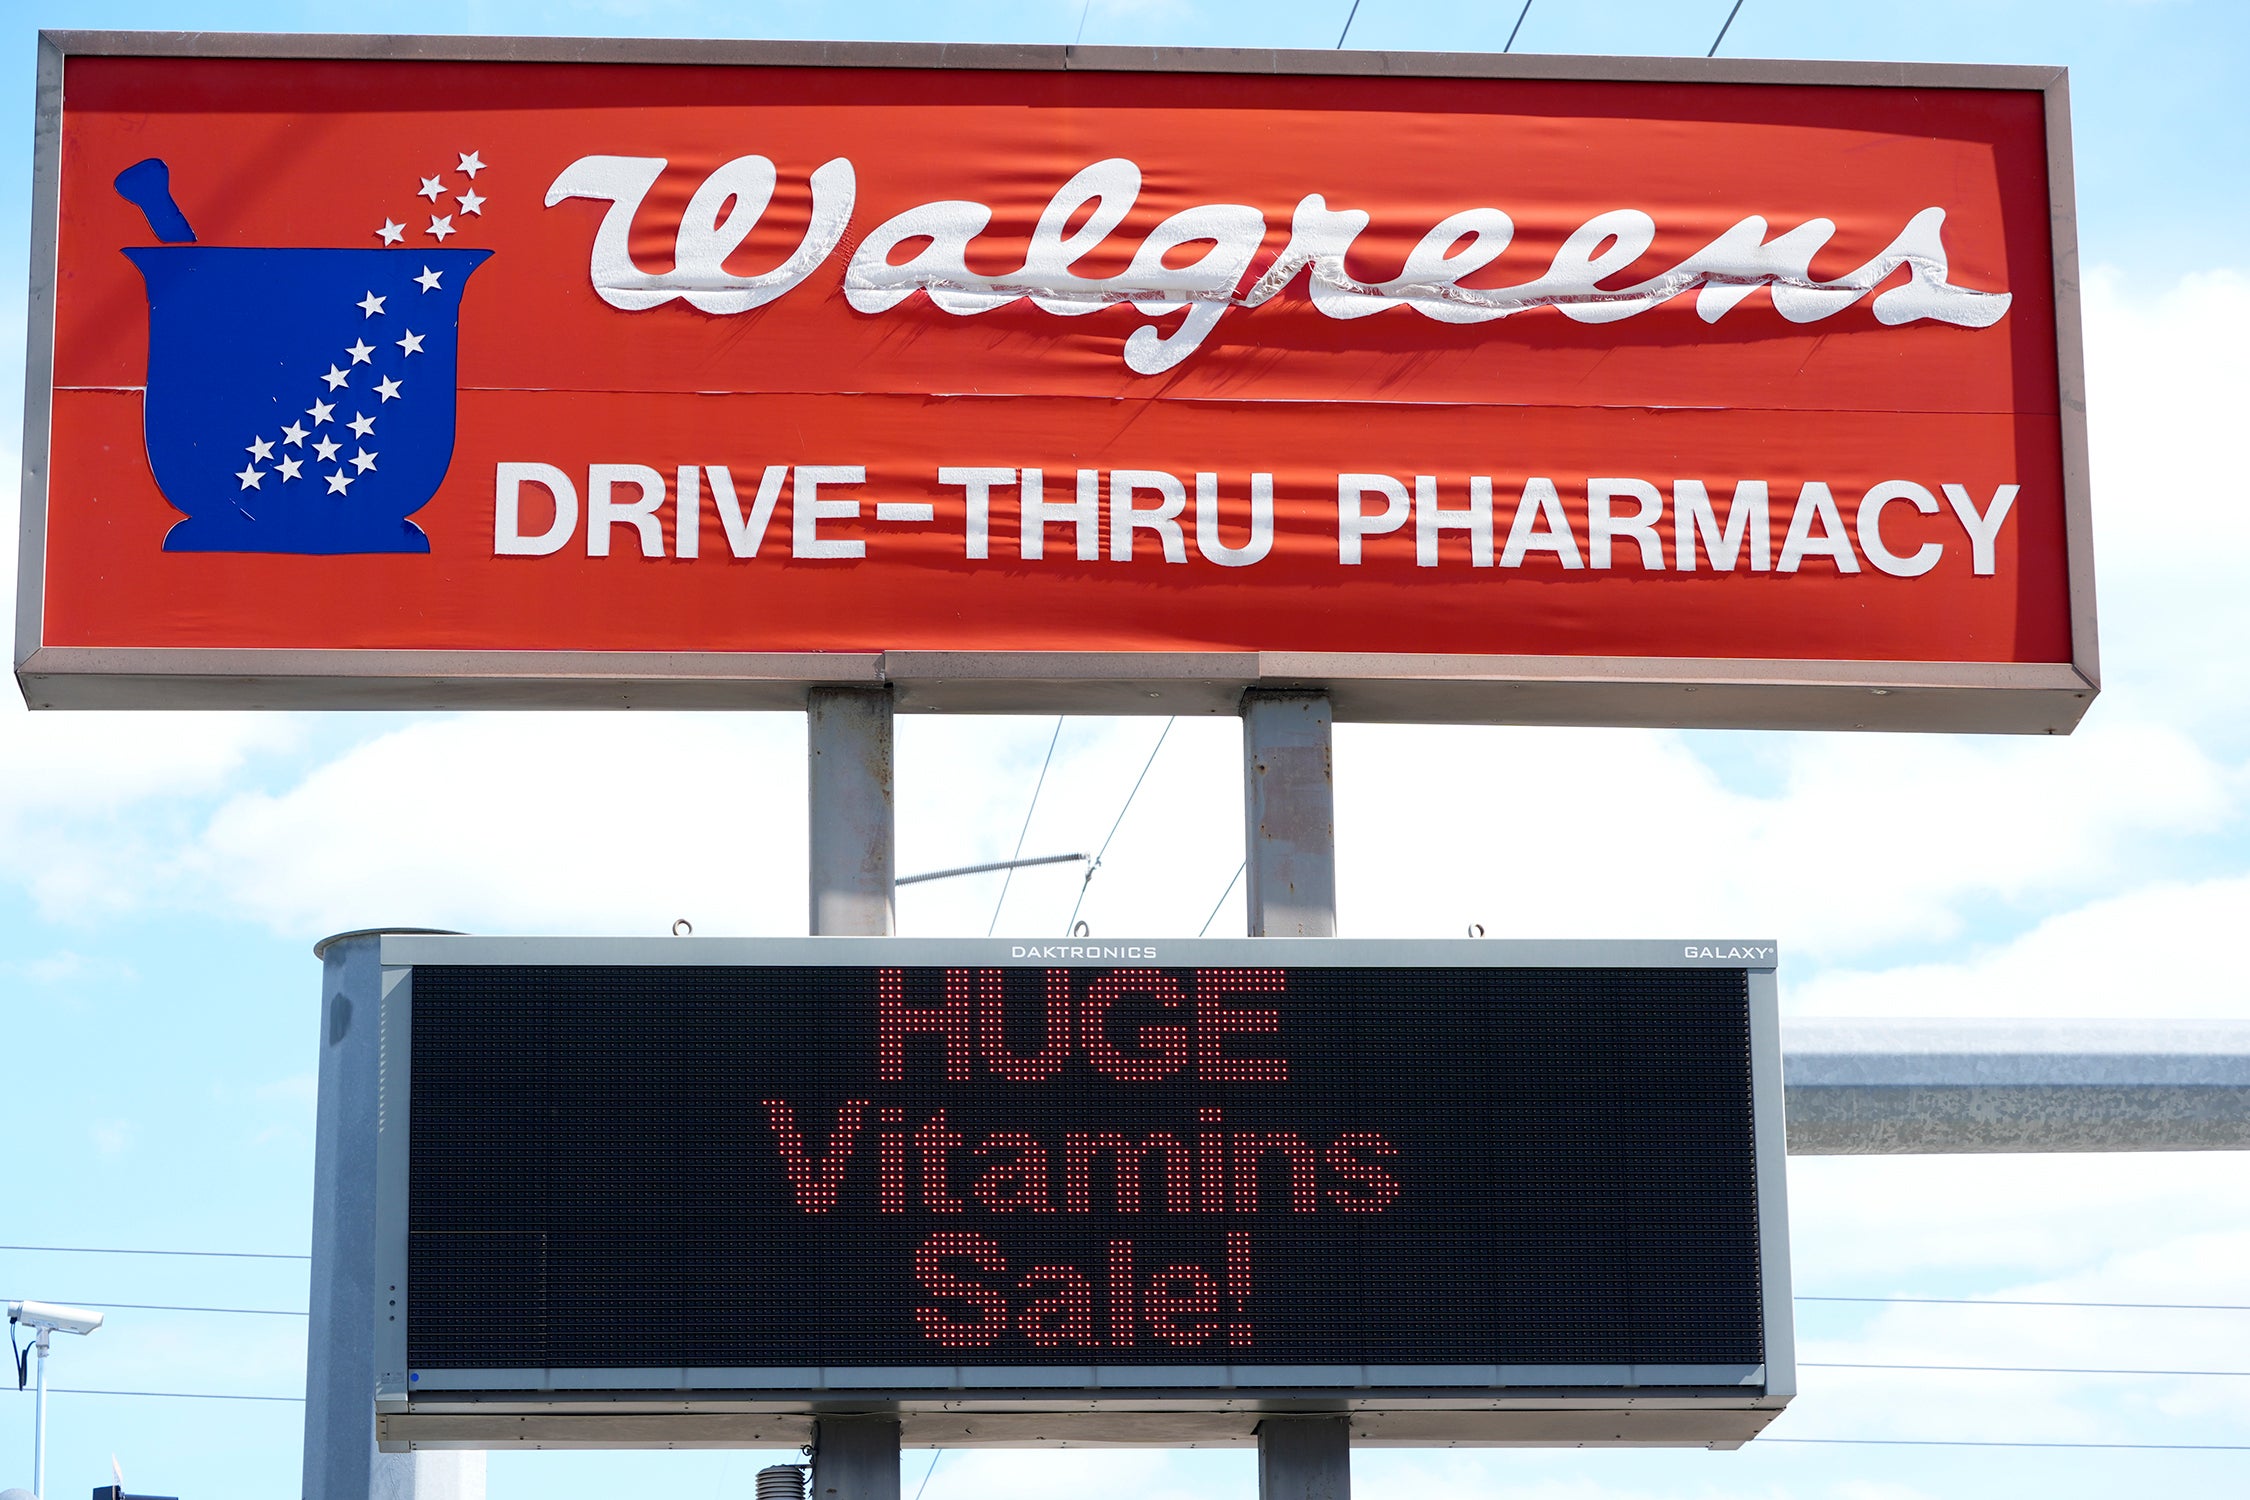 Walgreens has become the latest retailer to cut its prices